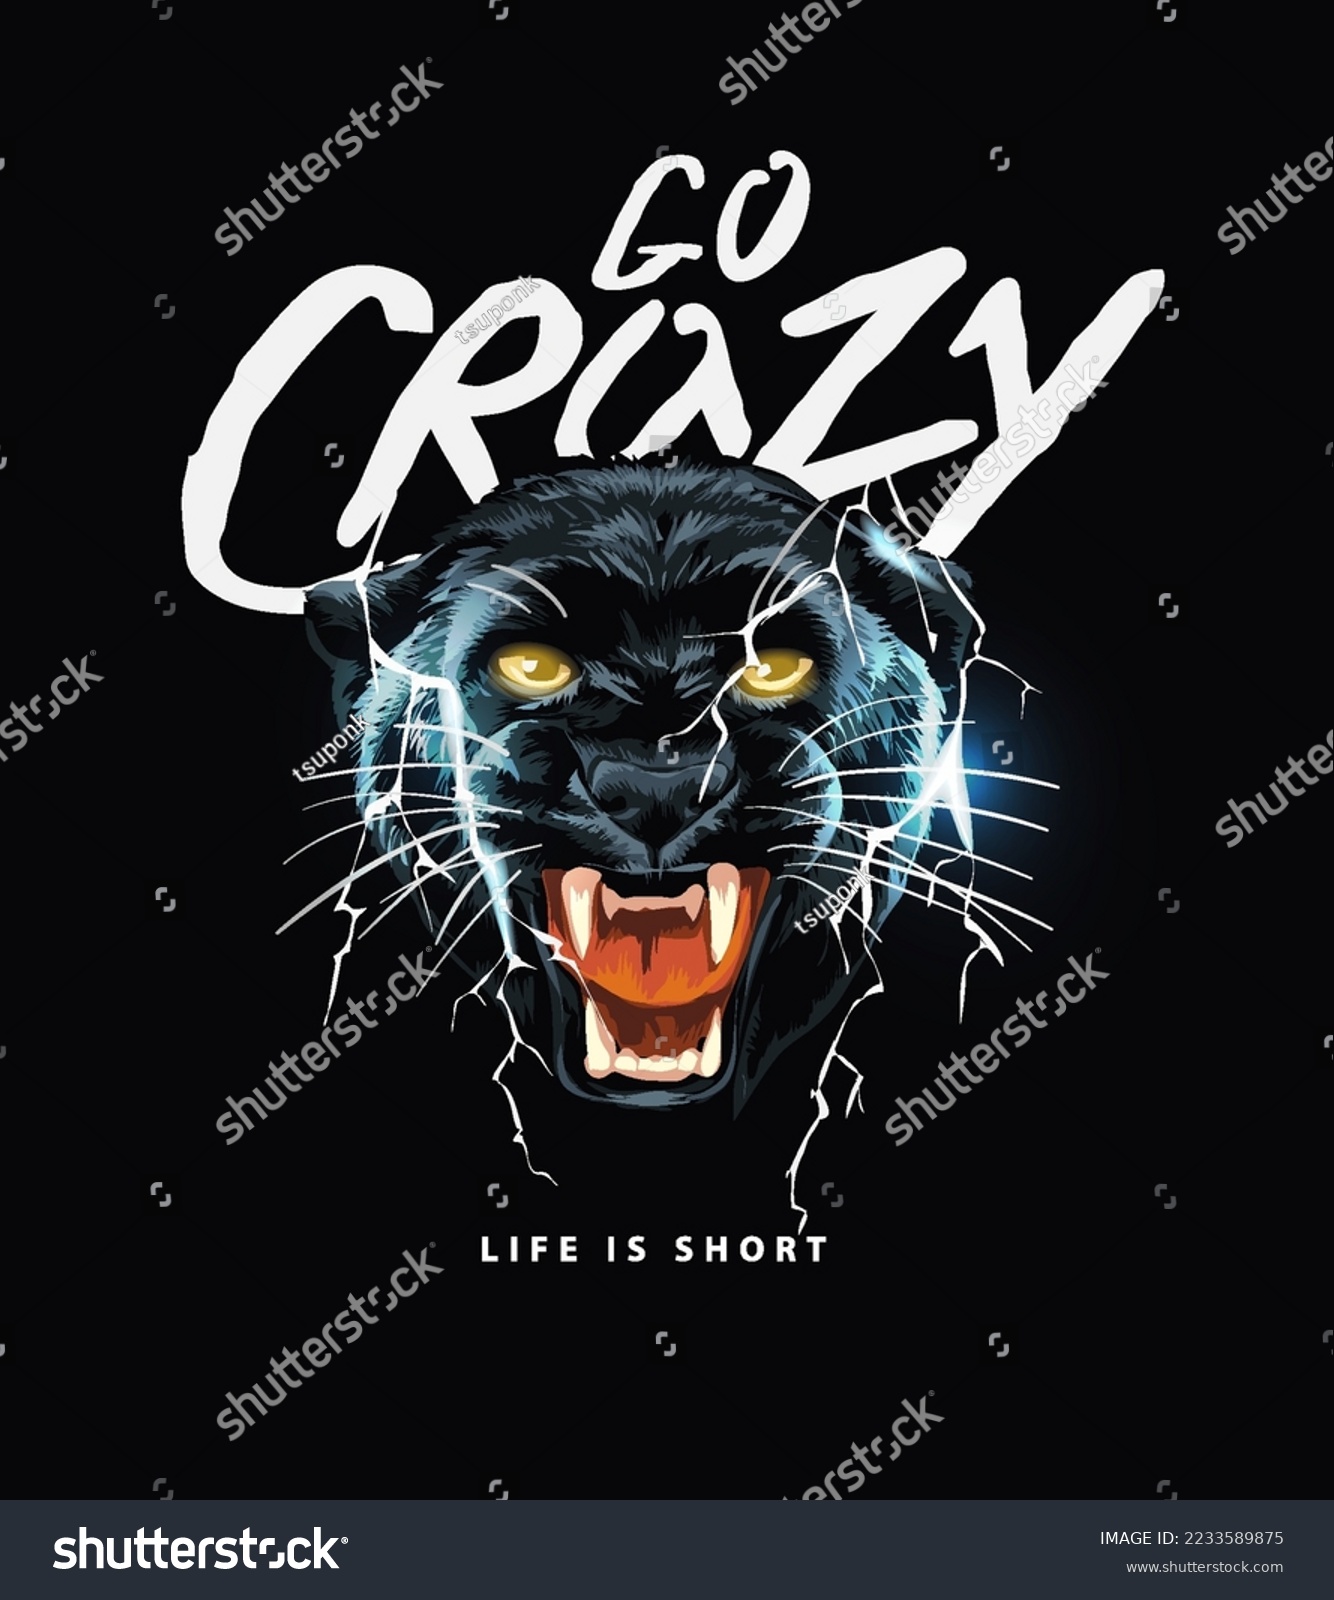 go crazy slogan with panther head and lighning vector illustration on black background #2233589875